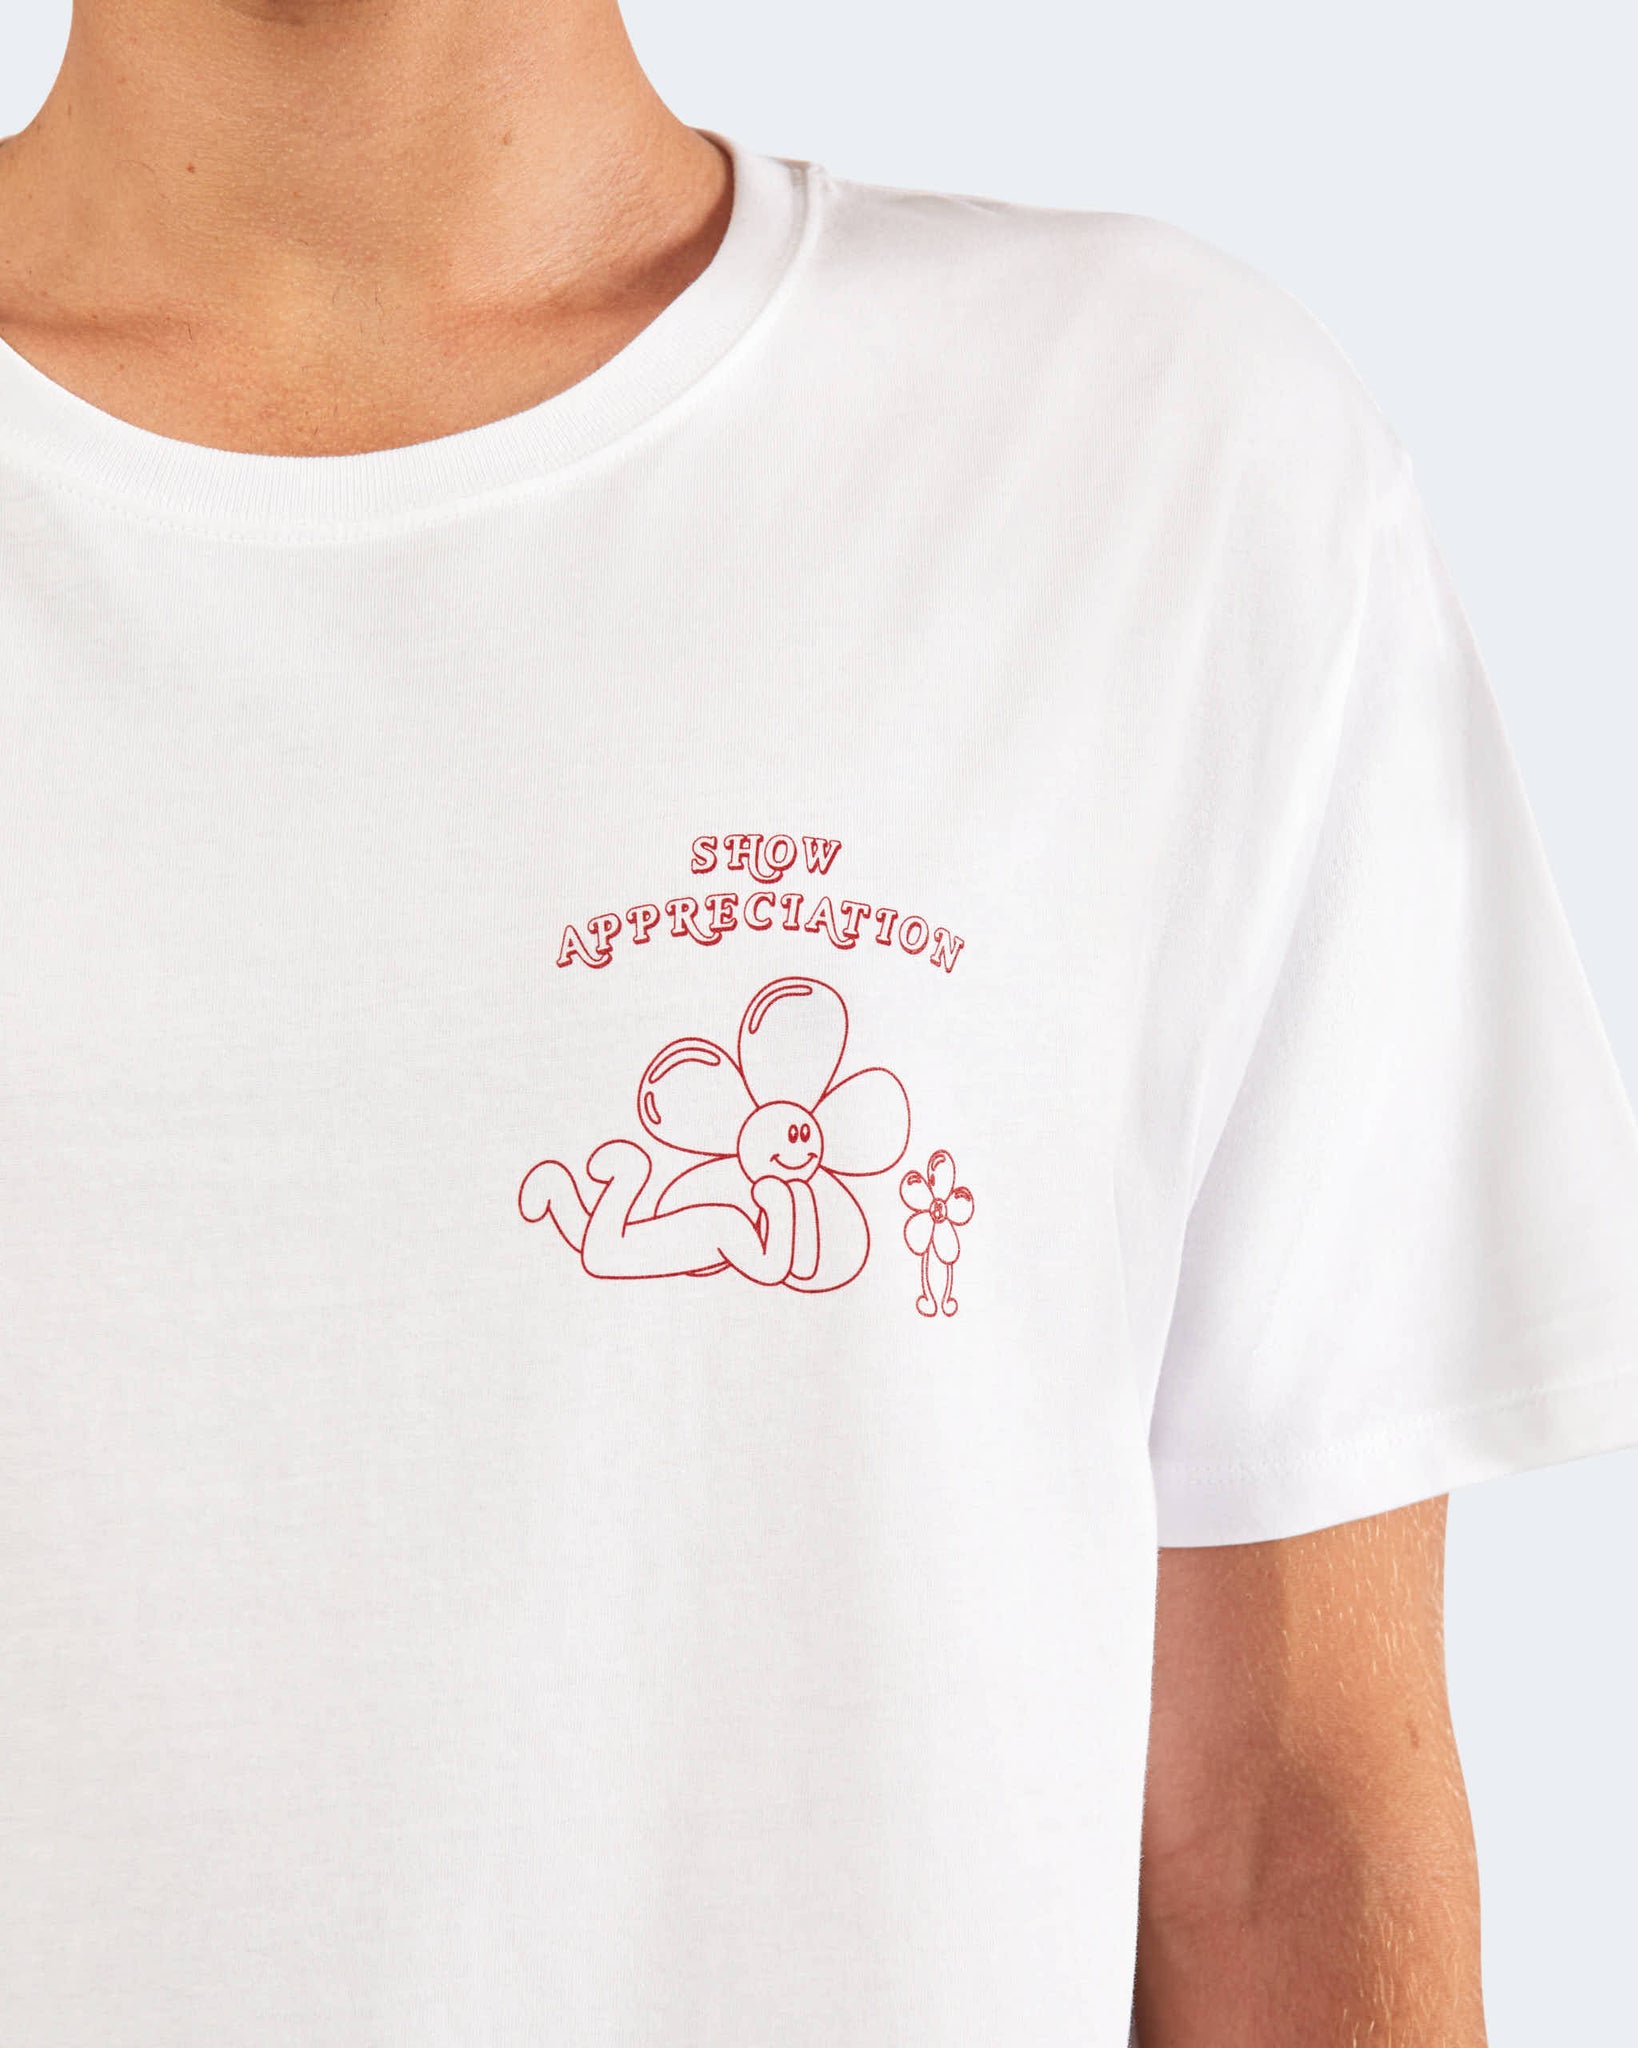 Show Appreciation Graphic Tee - Red